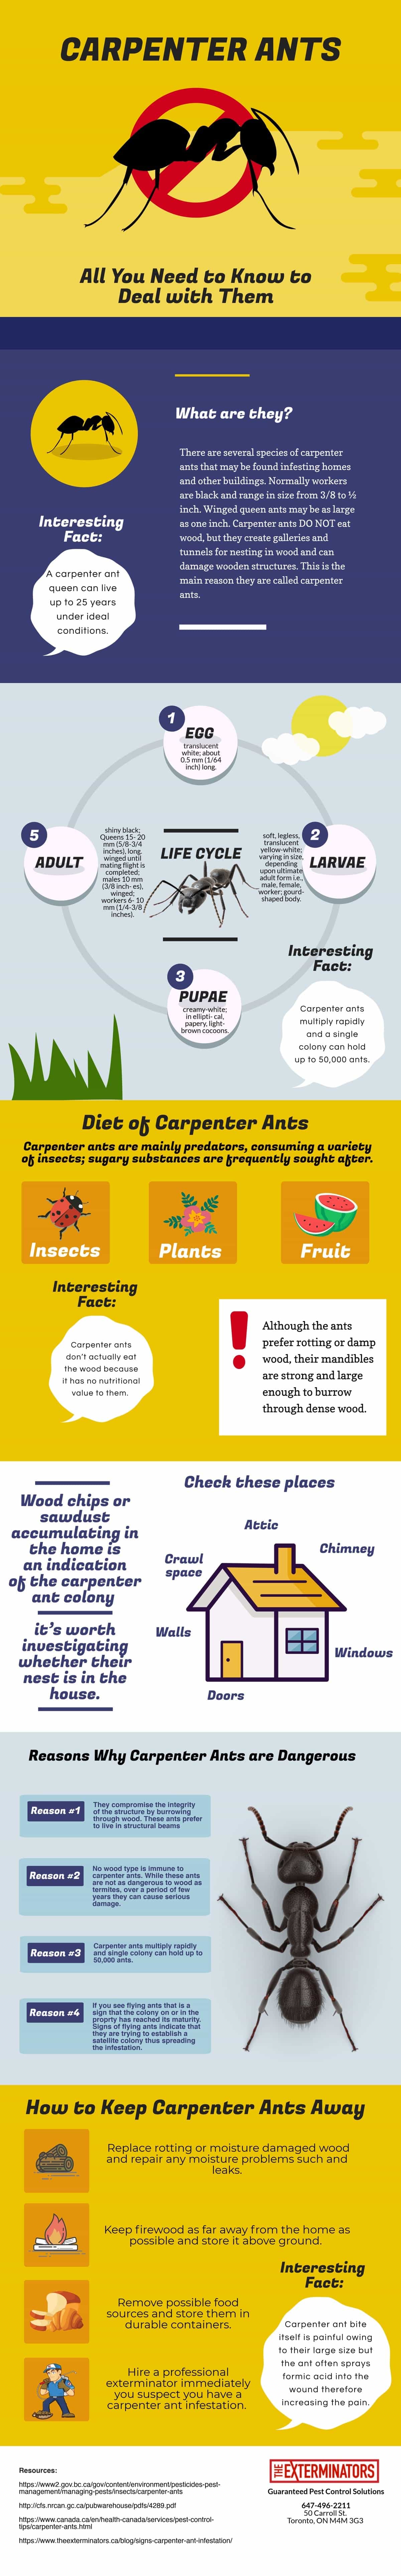 All About Carpenter Ants Infographic